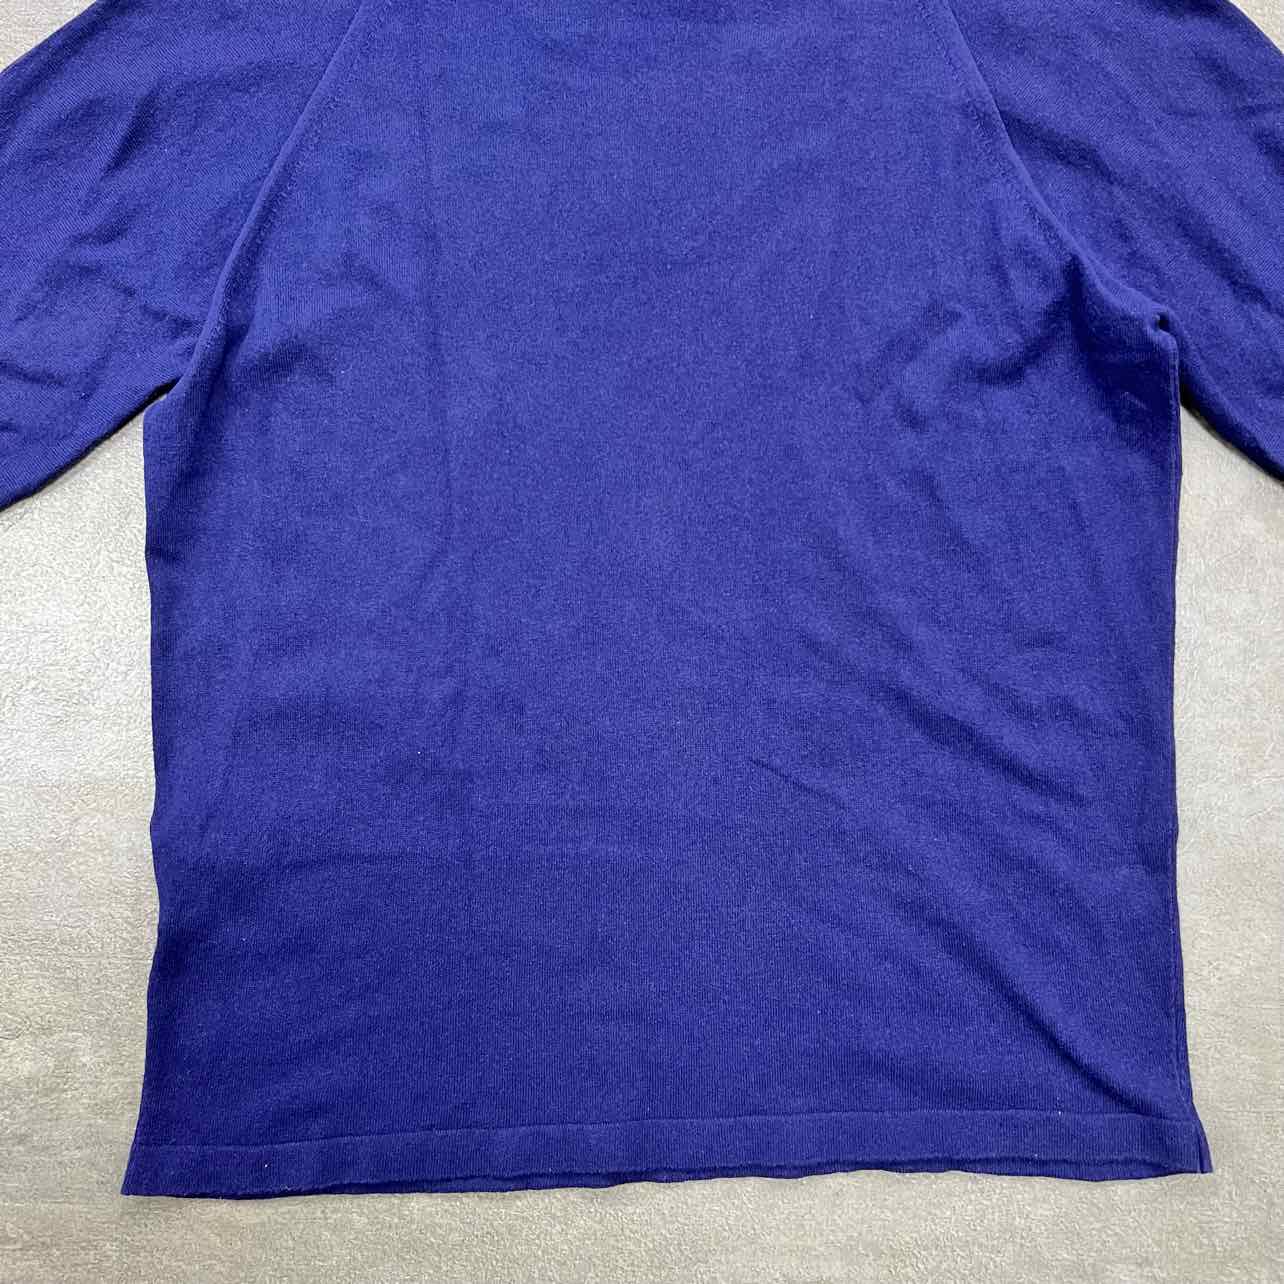 Stone Island T-Shirt &quot;COMPASS&quot; Navy Used Size M